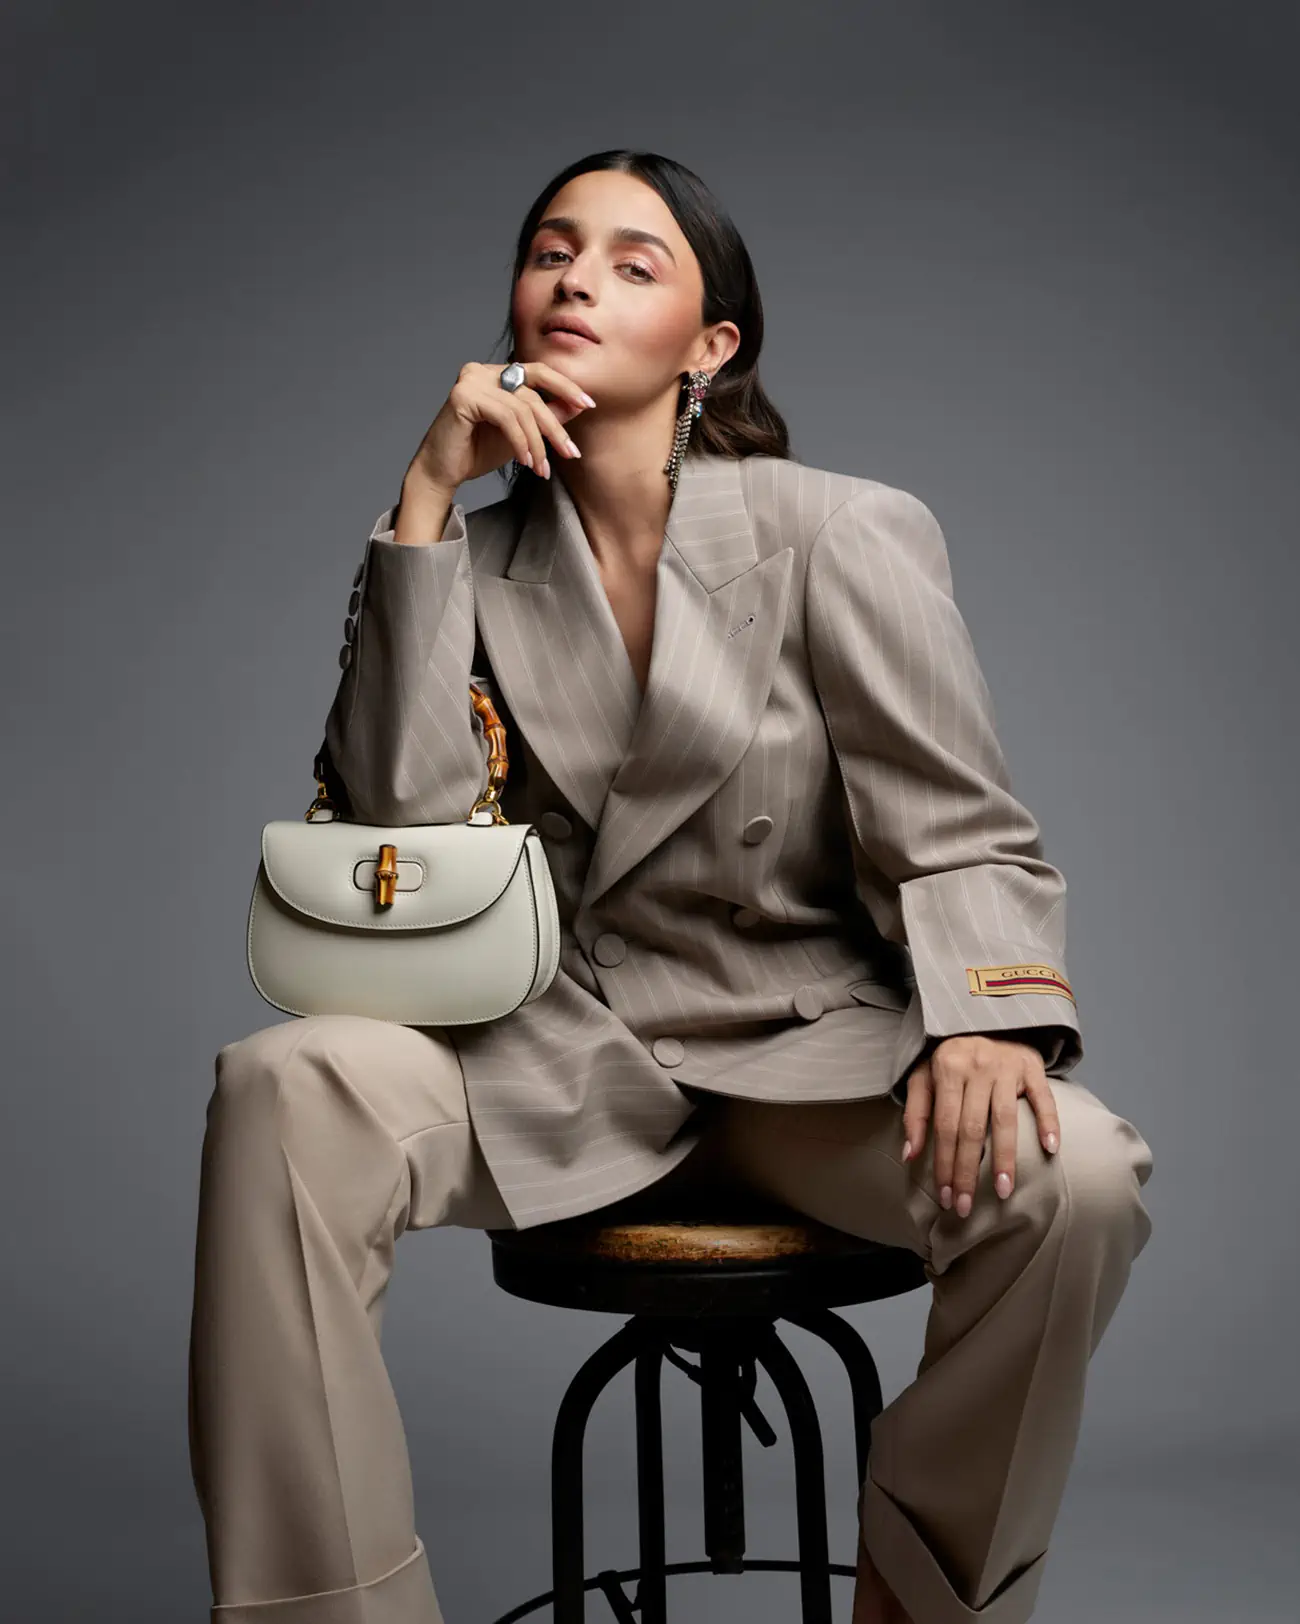 Alia becomes first Indian global ambassador for Gucci - The Shillong Times